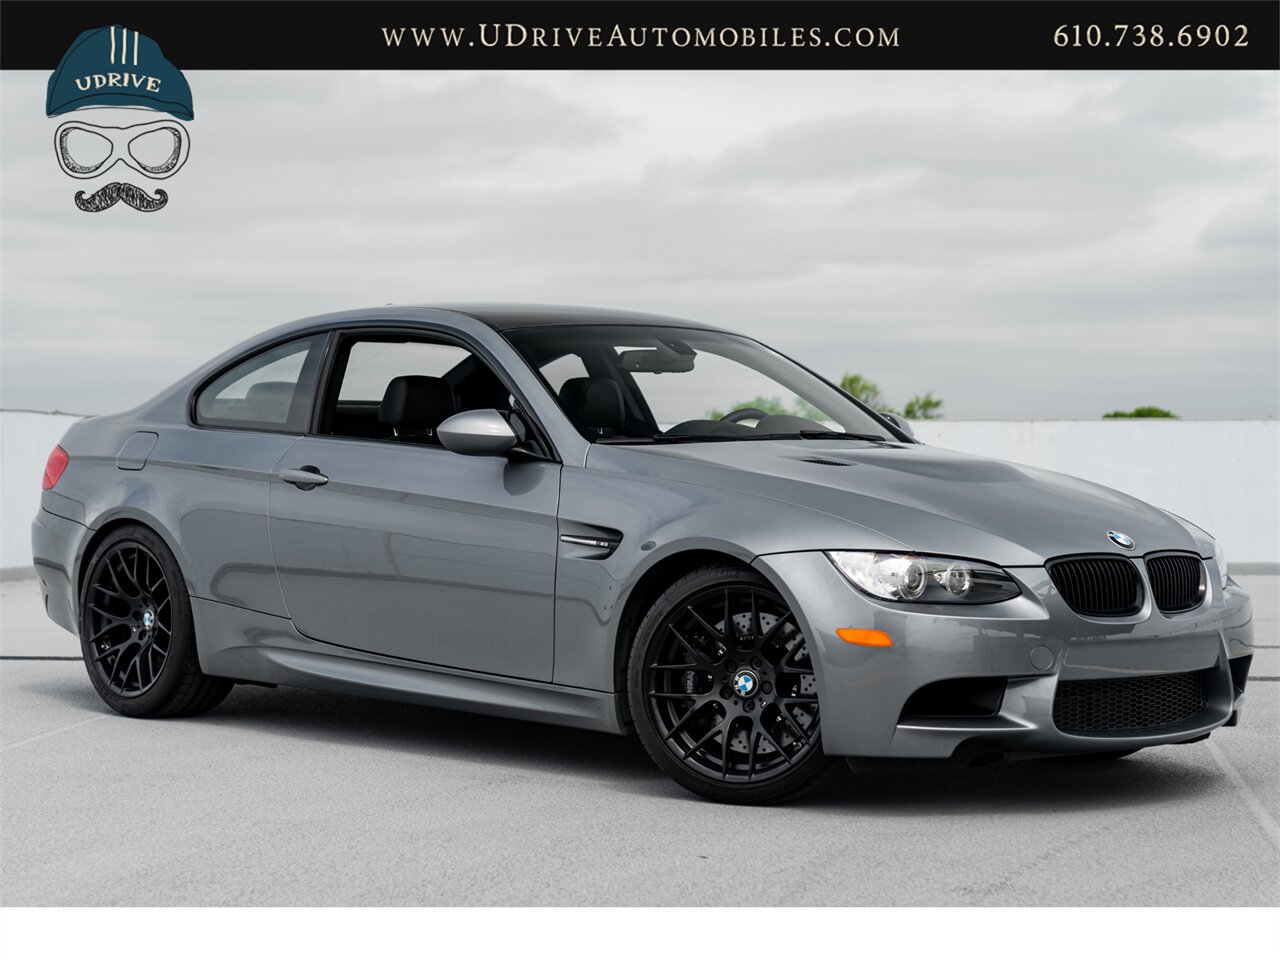 2012 BMW M3 E92 6 Speed 7k Miles Dinan Upgrades  GTS/359 Wheels Carbon Fiber Roof - Photo 3 - West Chester, PA 19382